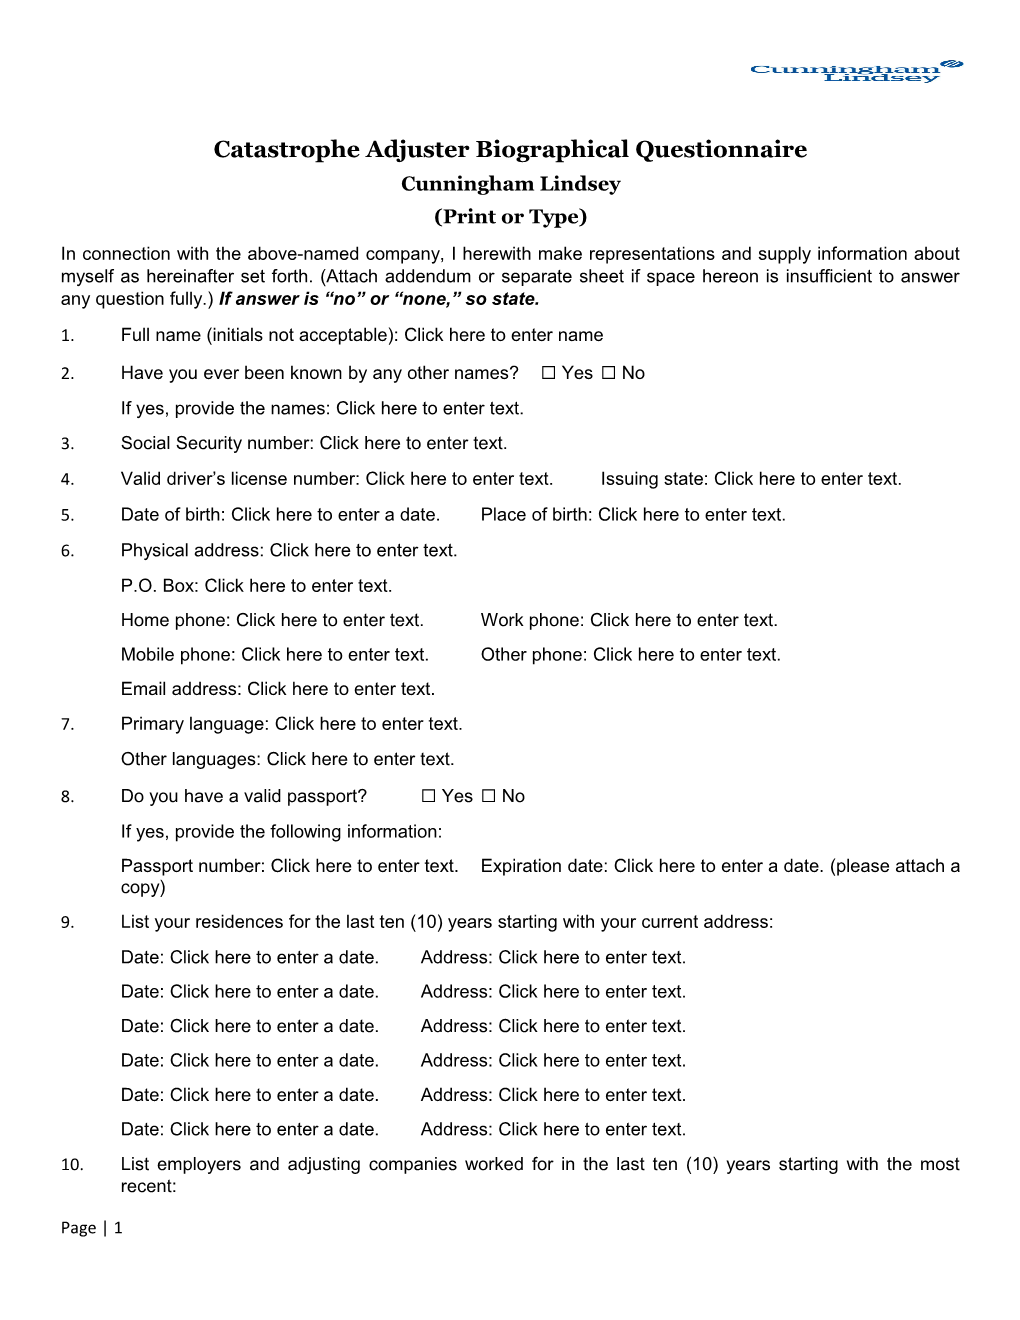 Catastrophe Adjuster Biographical Questionnaire